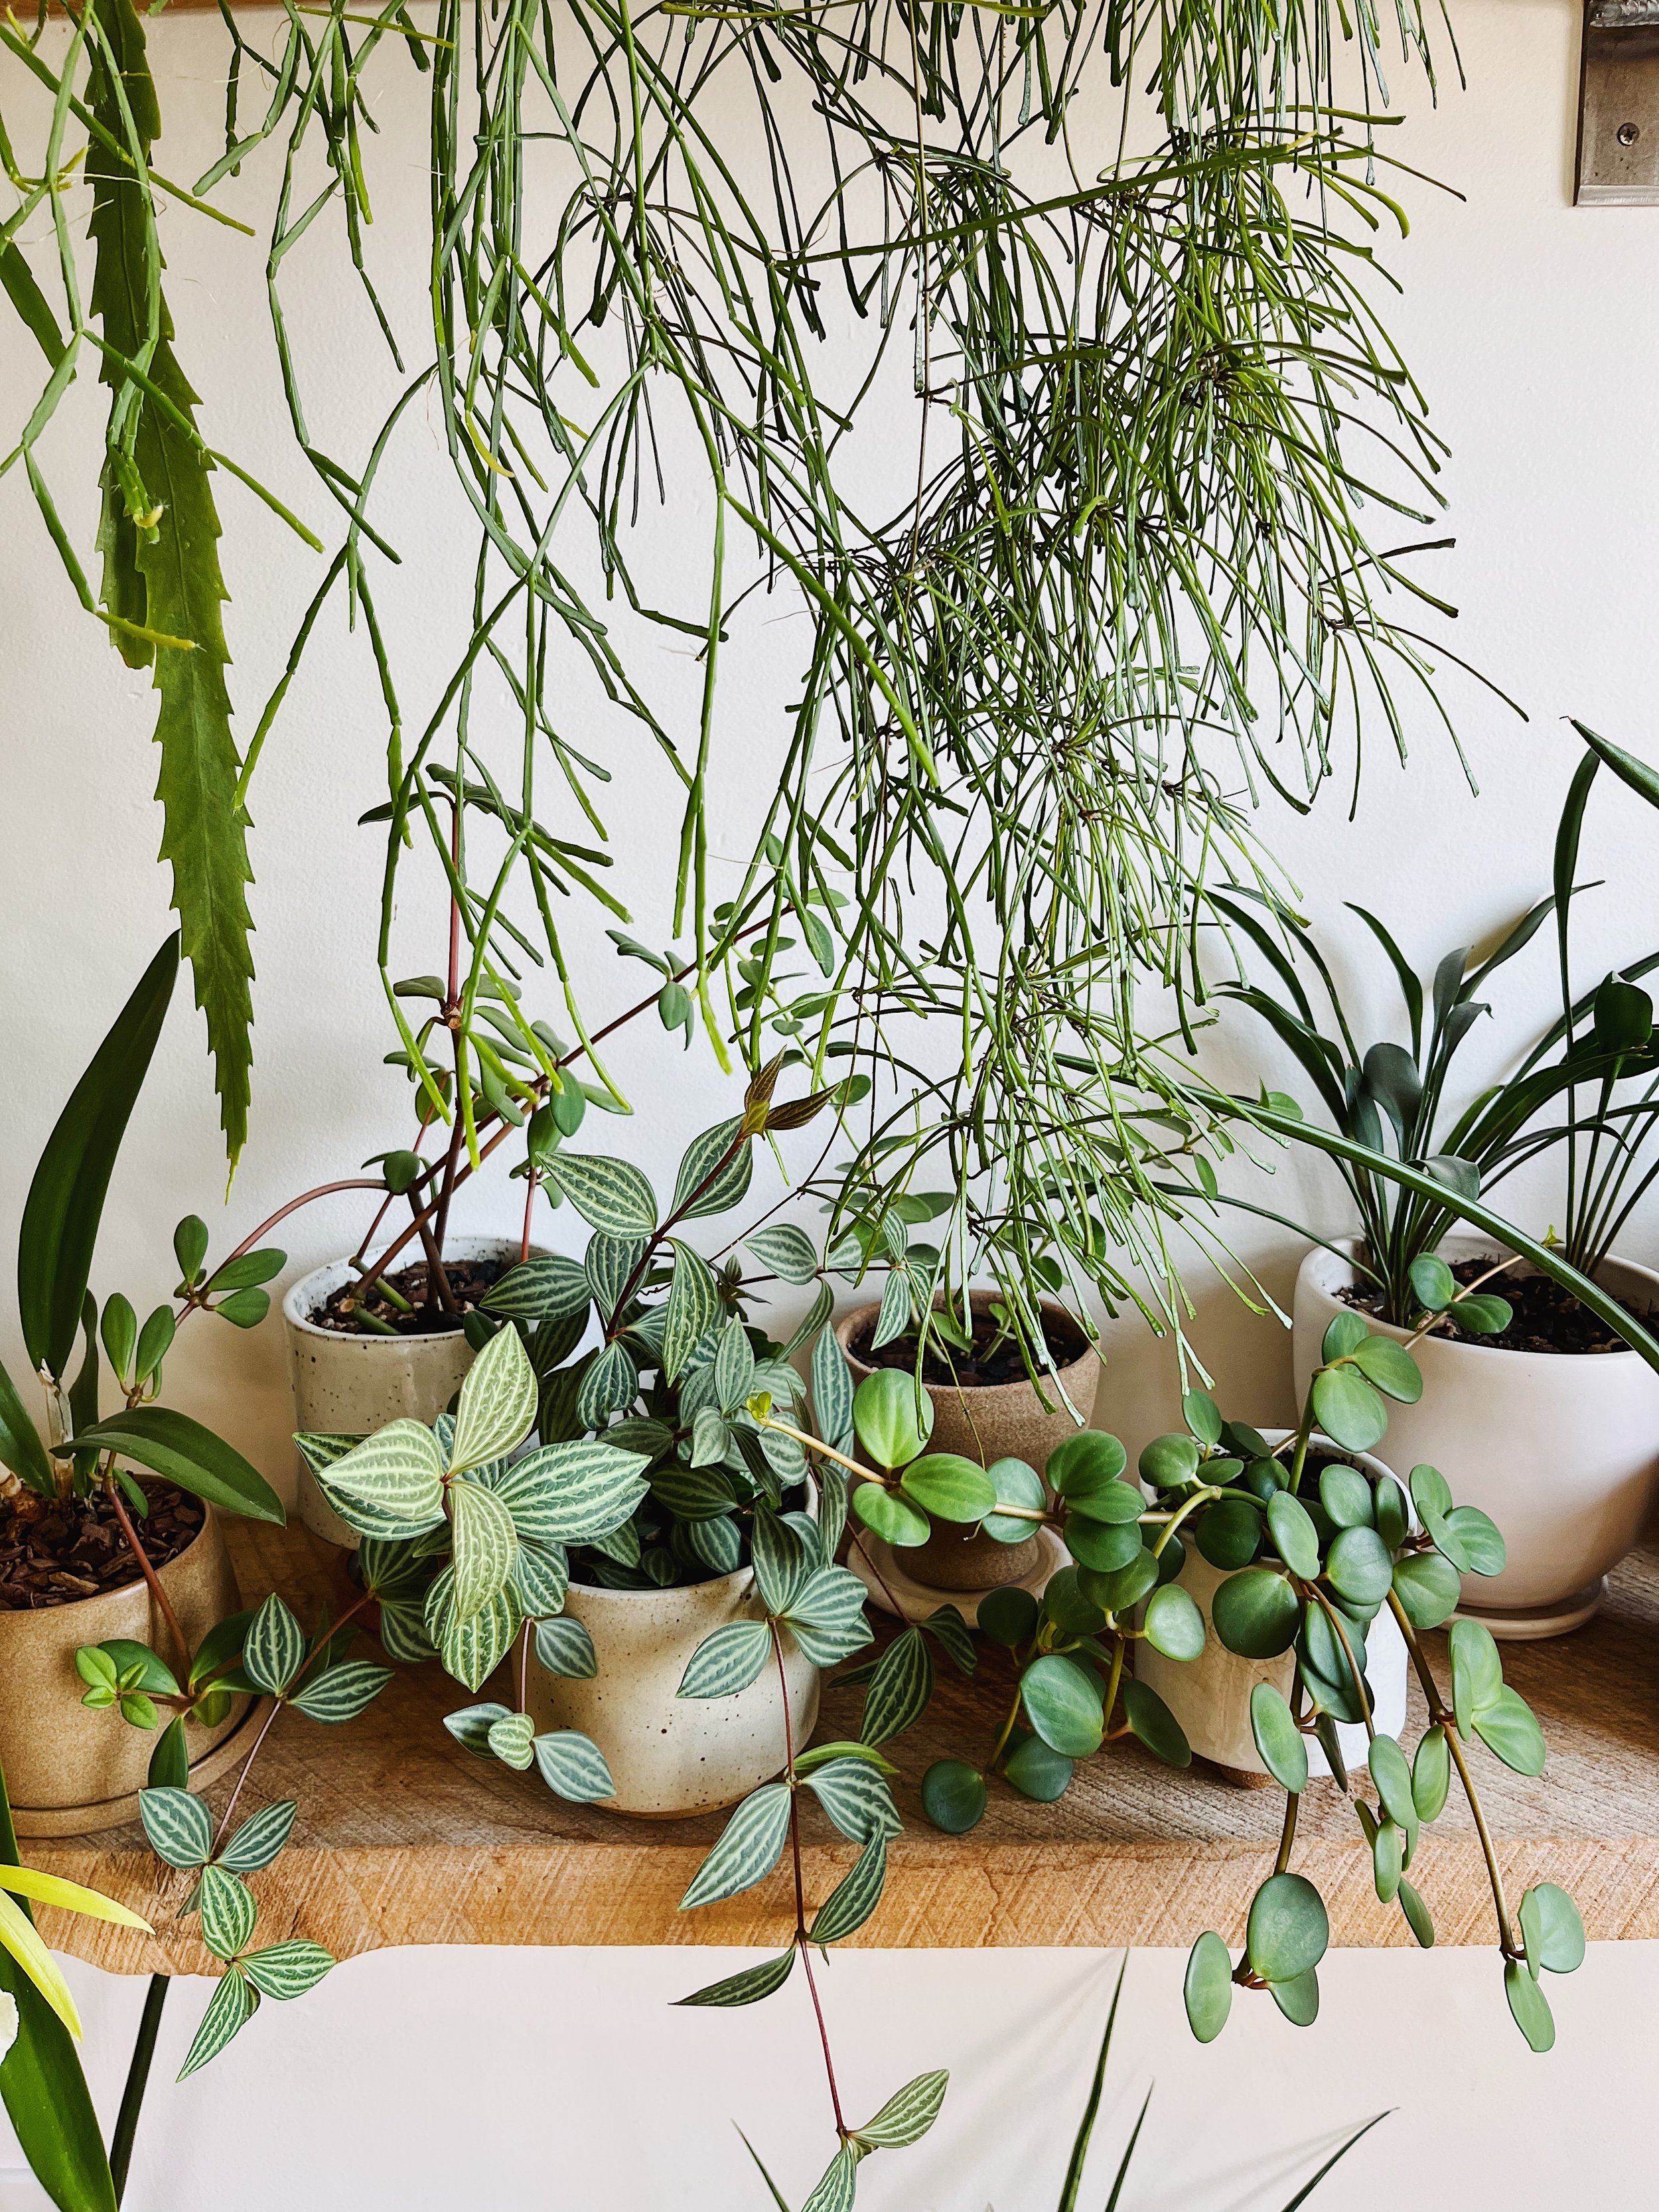 How to Increase Houseplant Humidity with a Pebble Tray